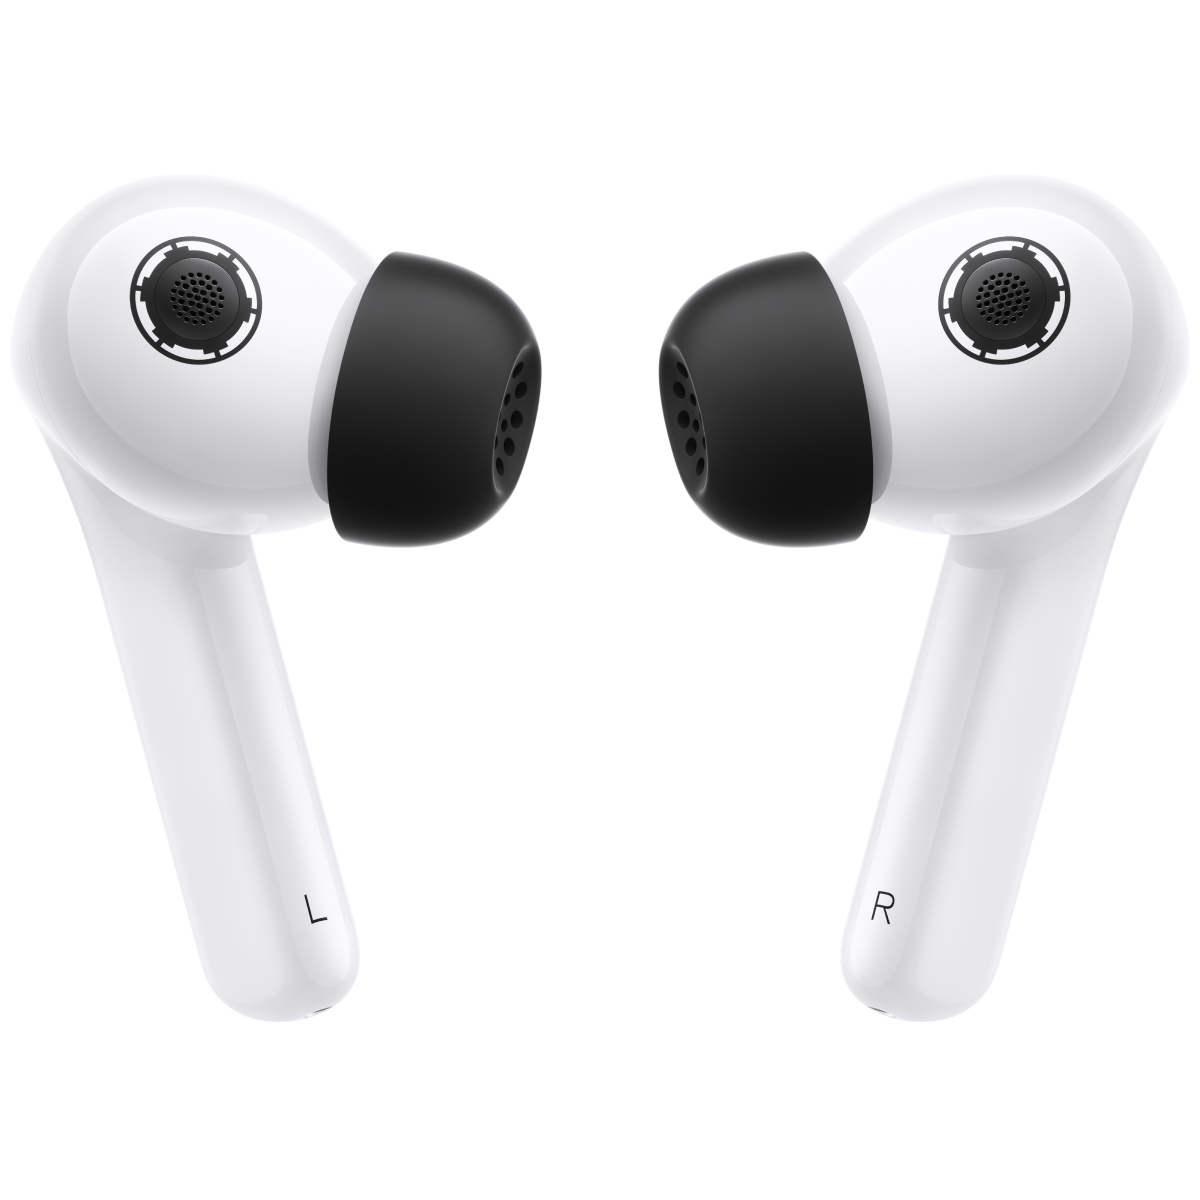 Xiaomi Buds 3 Star Wars Edition (Stormtrooper), , large image number 1